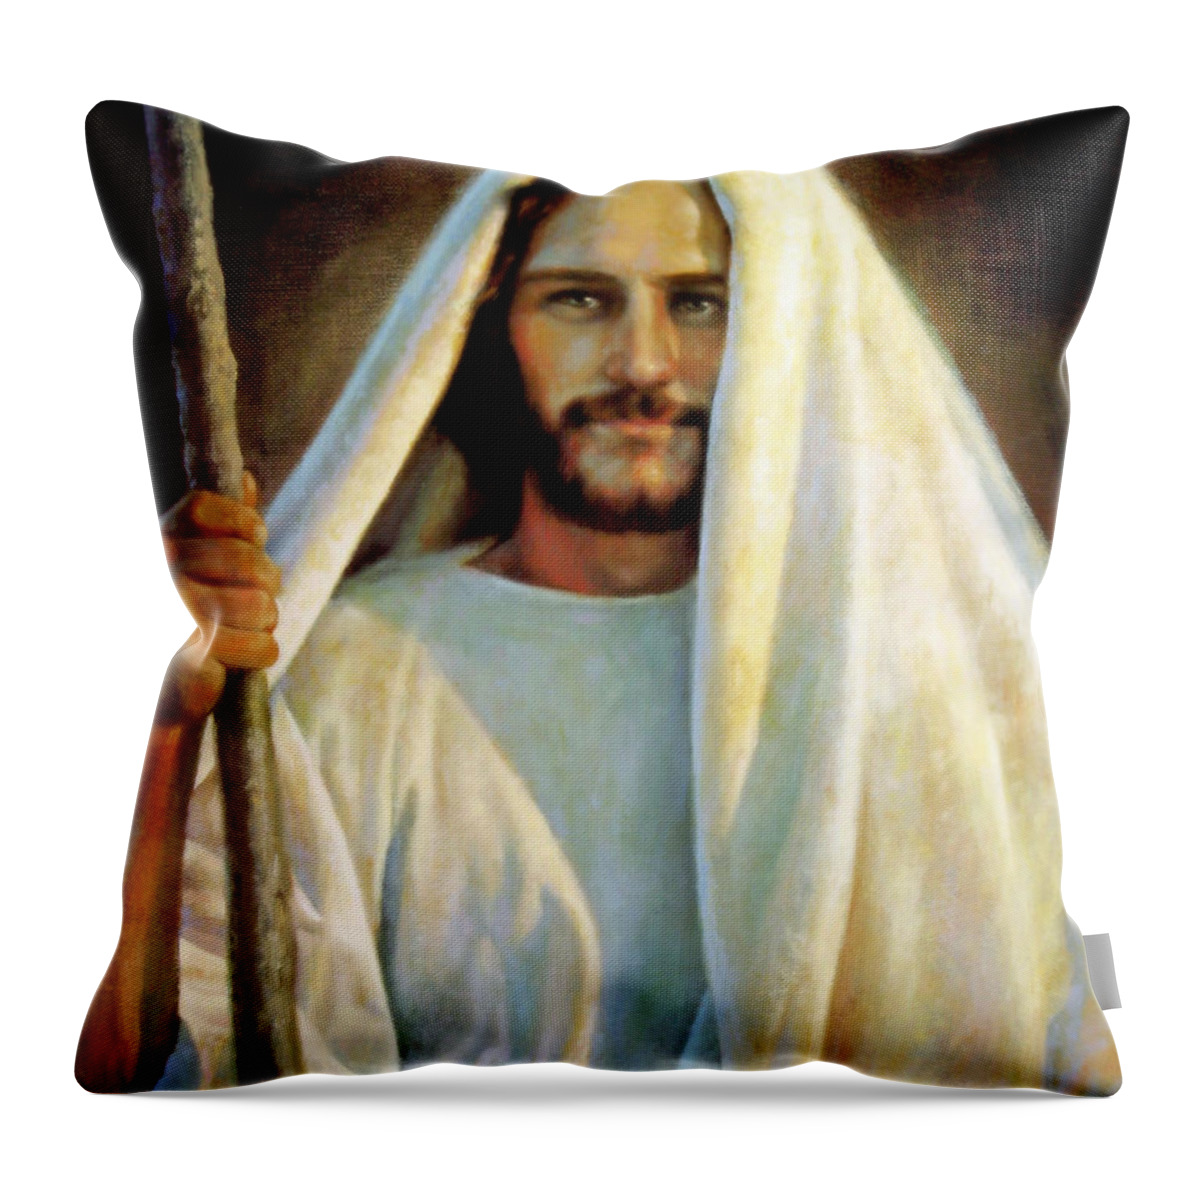 Jesus Throw Pillow featuring the painting The Savior by Greg Olsen